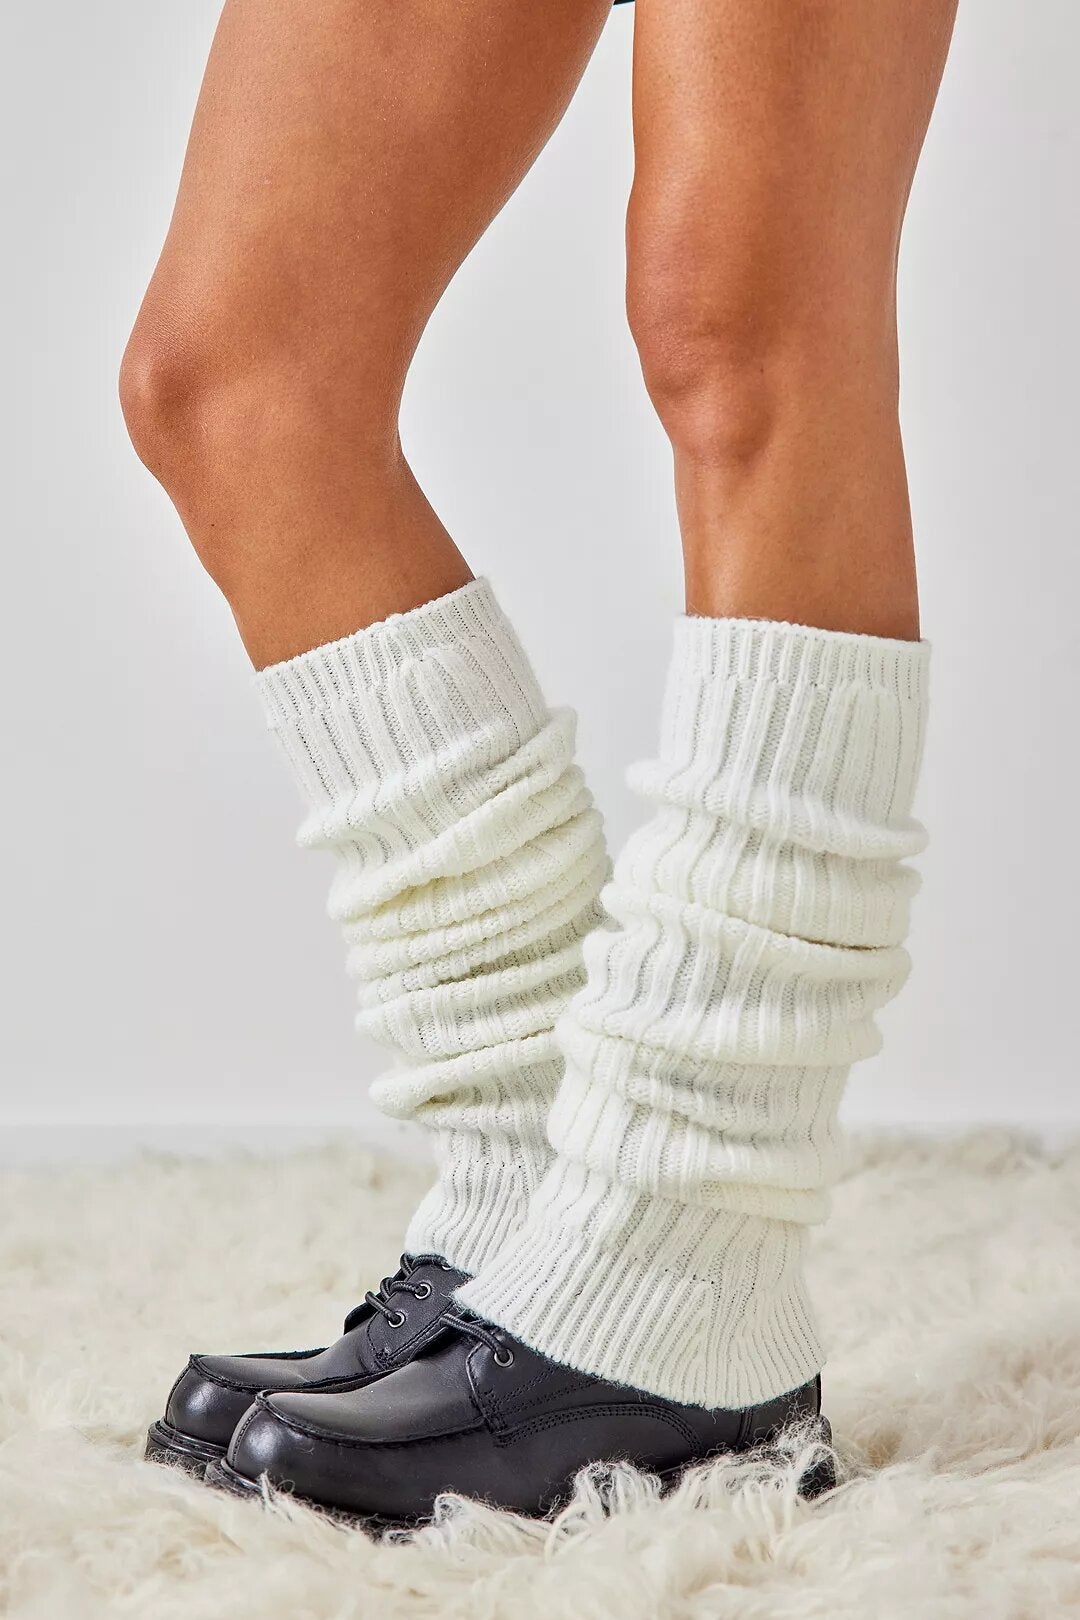 Out From Under + Extra-Long Leg Warmers